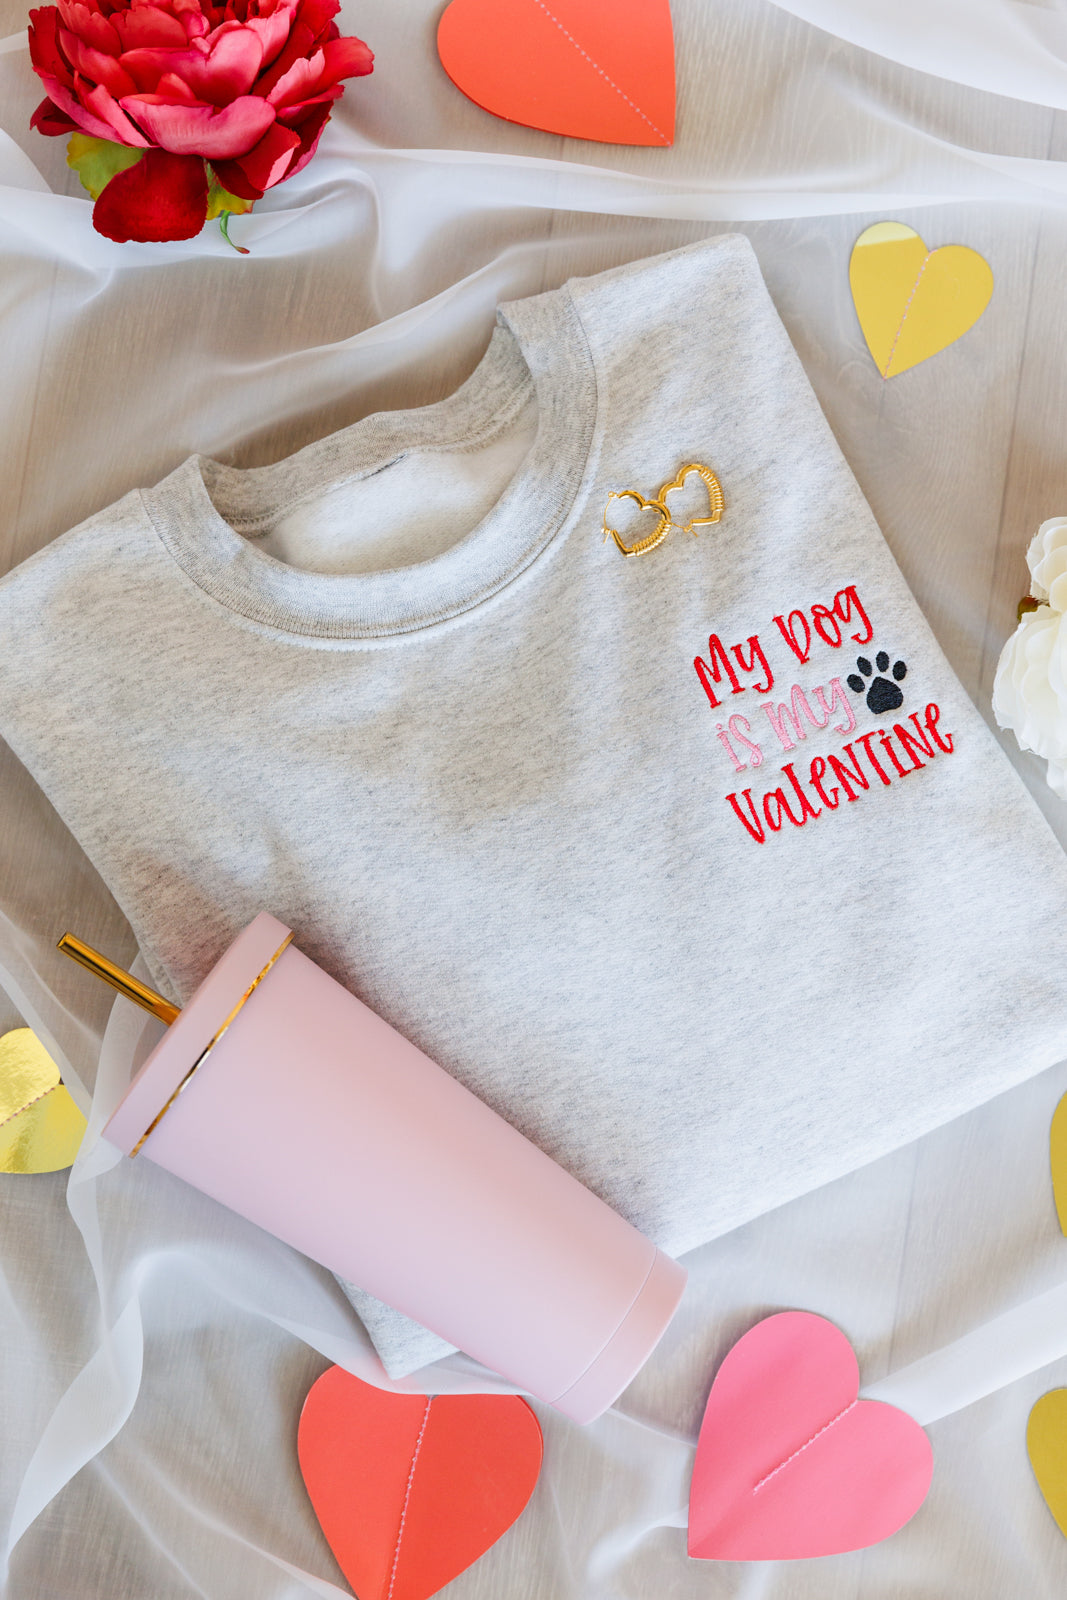 PREORDER: My Dog is My Valentine Embroidered Sweatshirt Ave Shops